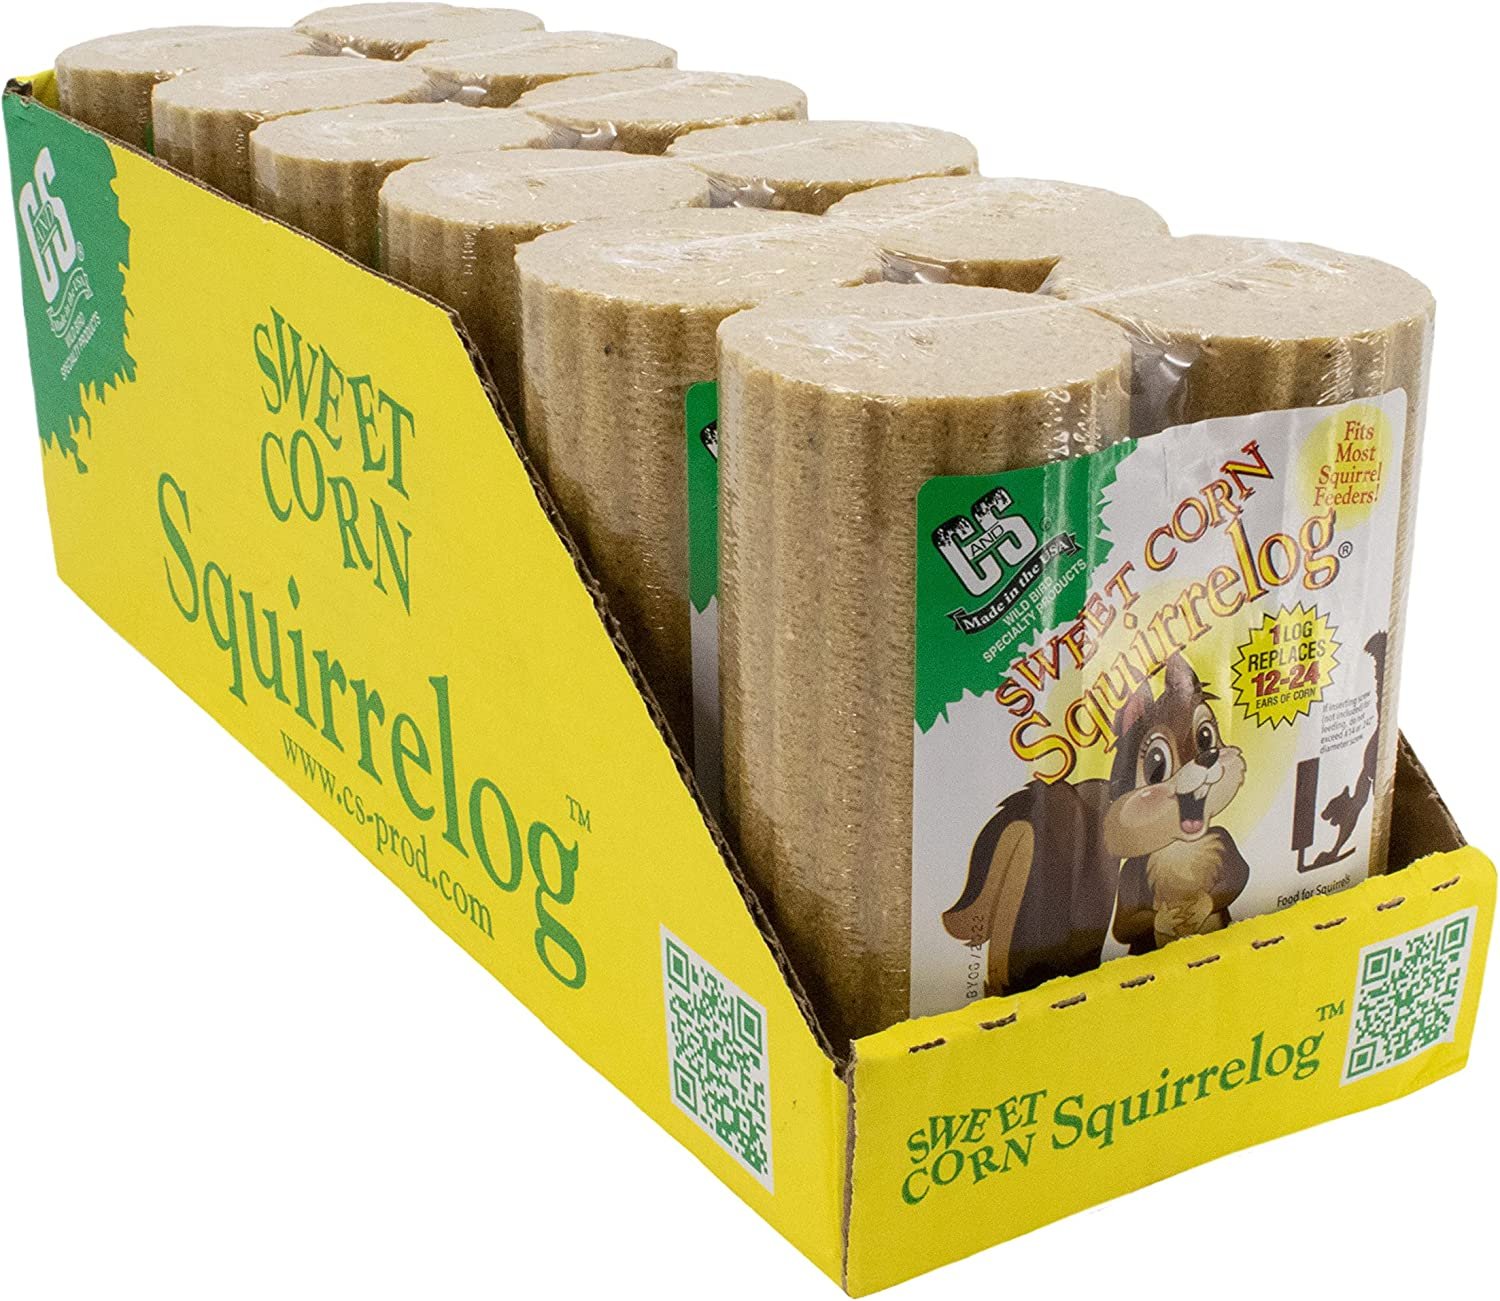 Squirrel Food, 12 One lb Logs in Total-Sweet Corn Squirrelog, 6-Pack Refill,